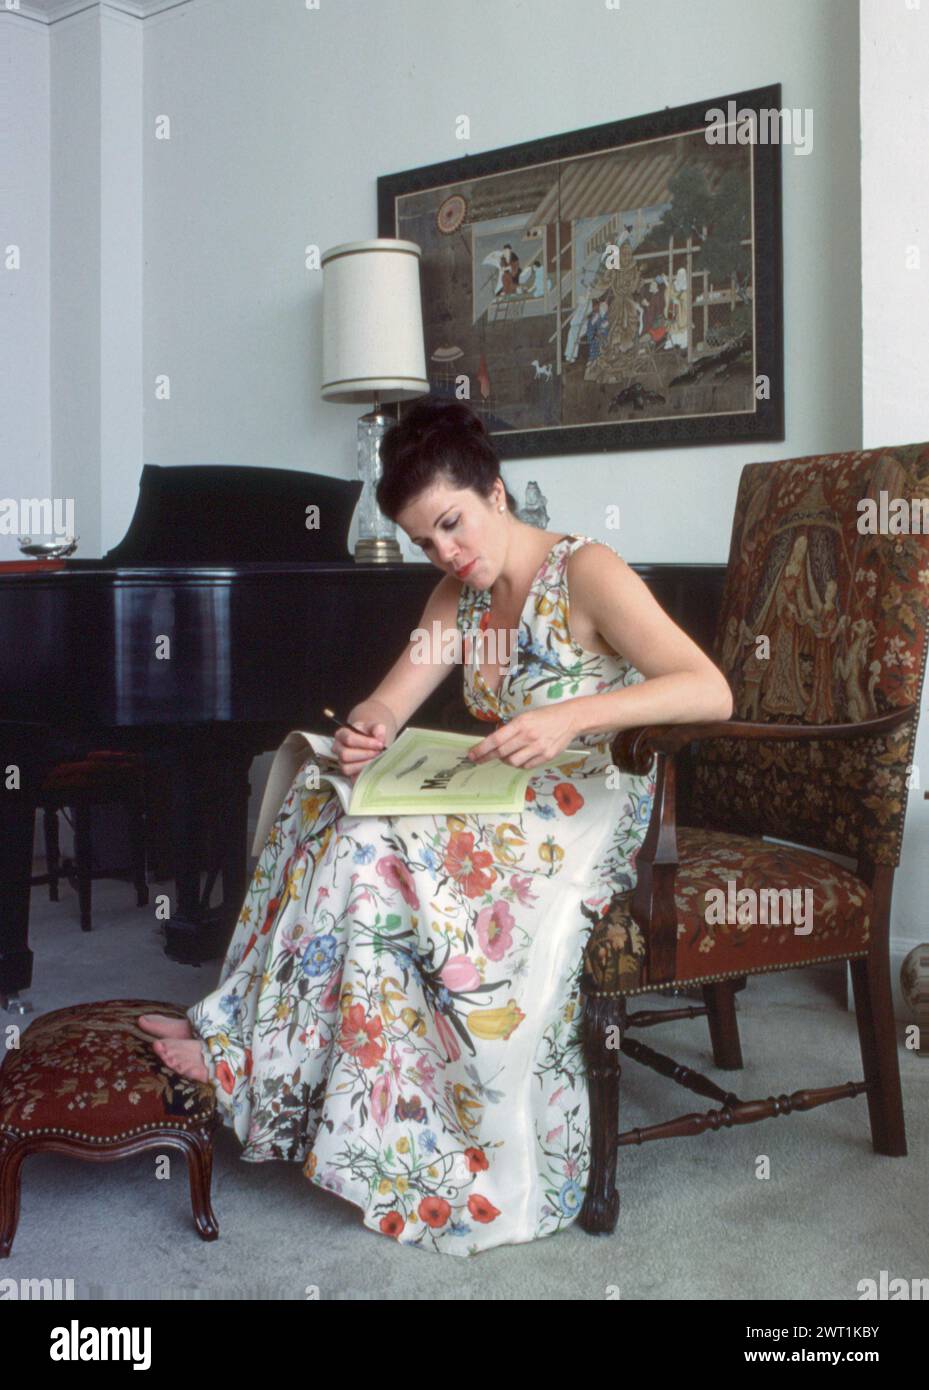 A portrait of the acclaimed cellist Christine Walevska who is best known for her many recordings with Philips Records. Called the 'Goddess of the Cello' she became the first concert musician to perform in Cuba under the Castro regime. This is a late 1970s portrait she is annotating a Mendelssohn score.. Stock Photo